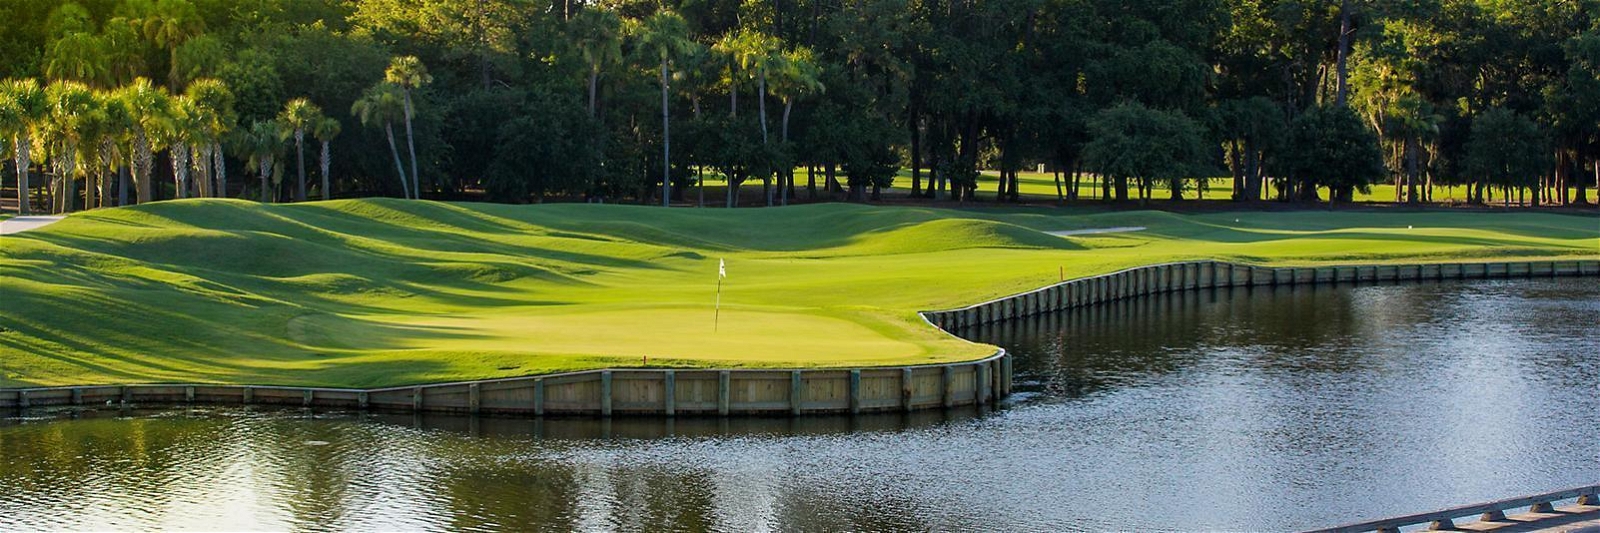 Golf Vacation Package - Heron Point by Pete Dye at The Sea Pines Resort